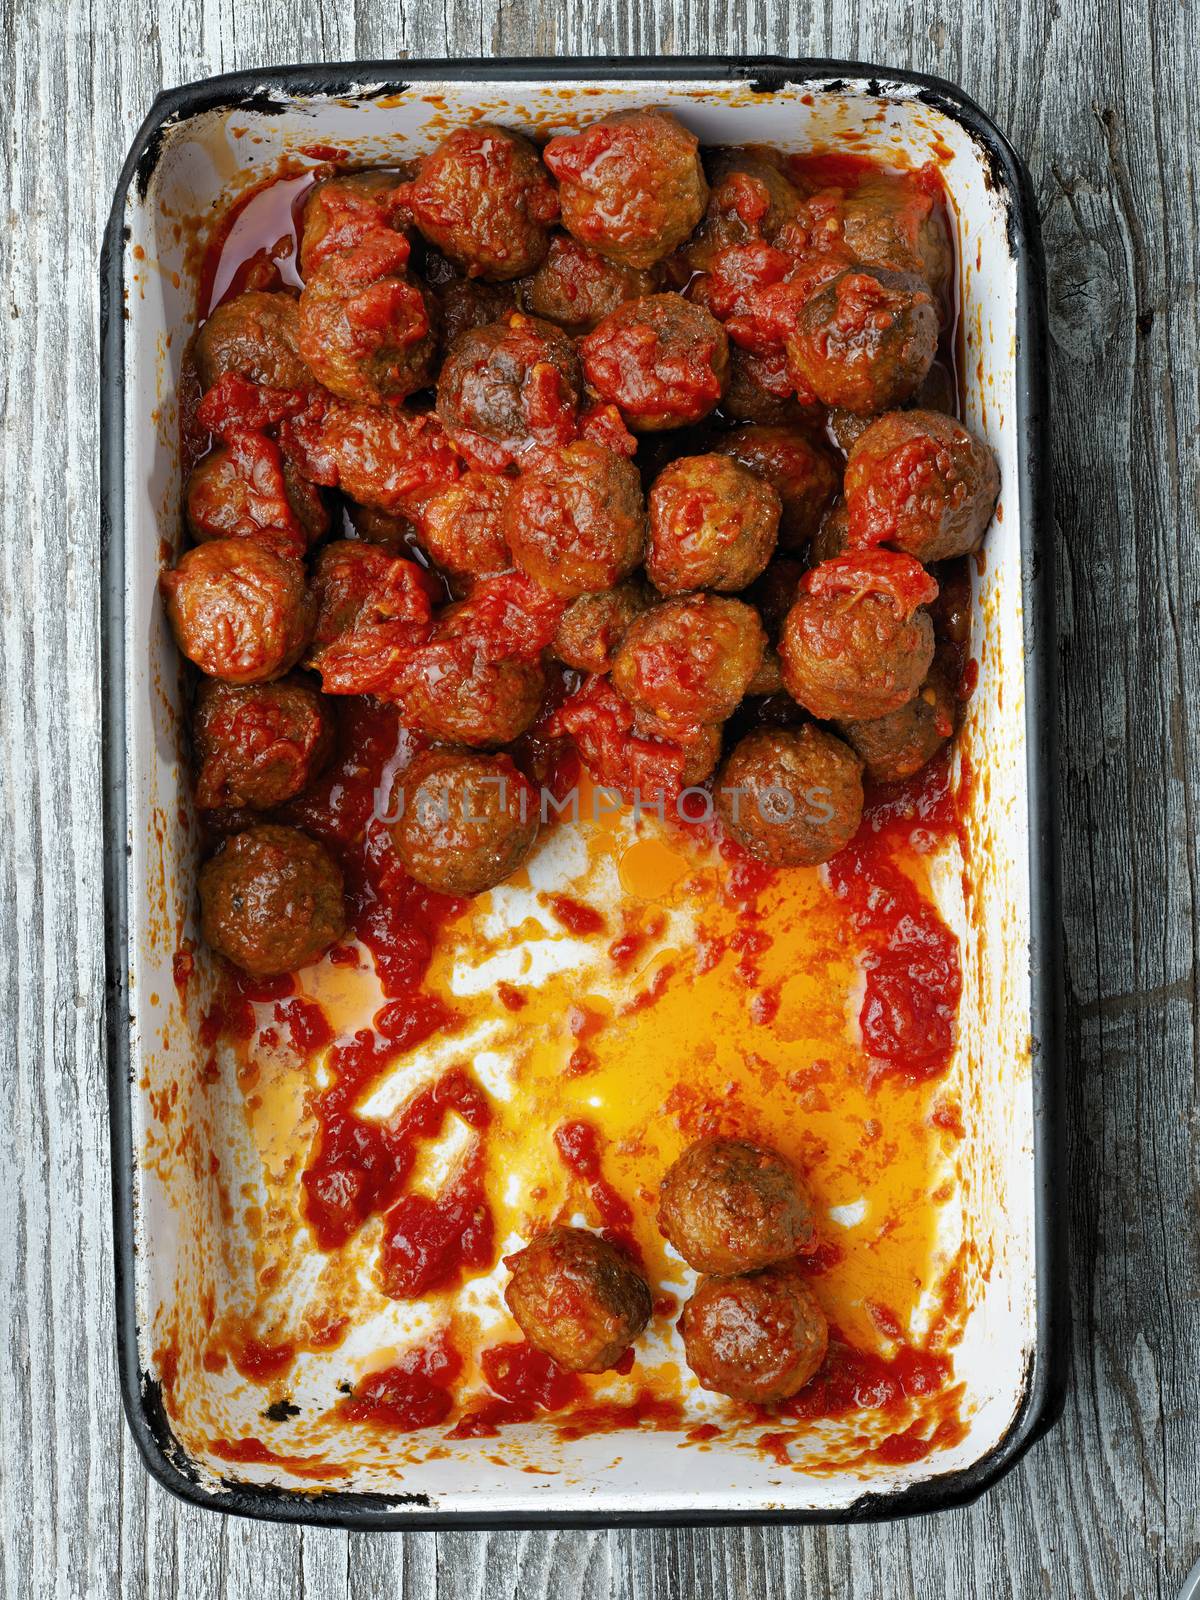 rustic italian meatball in tomato sauce by zkruger